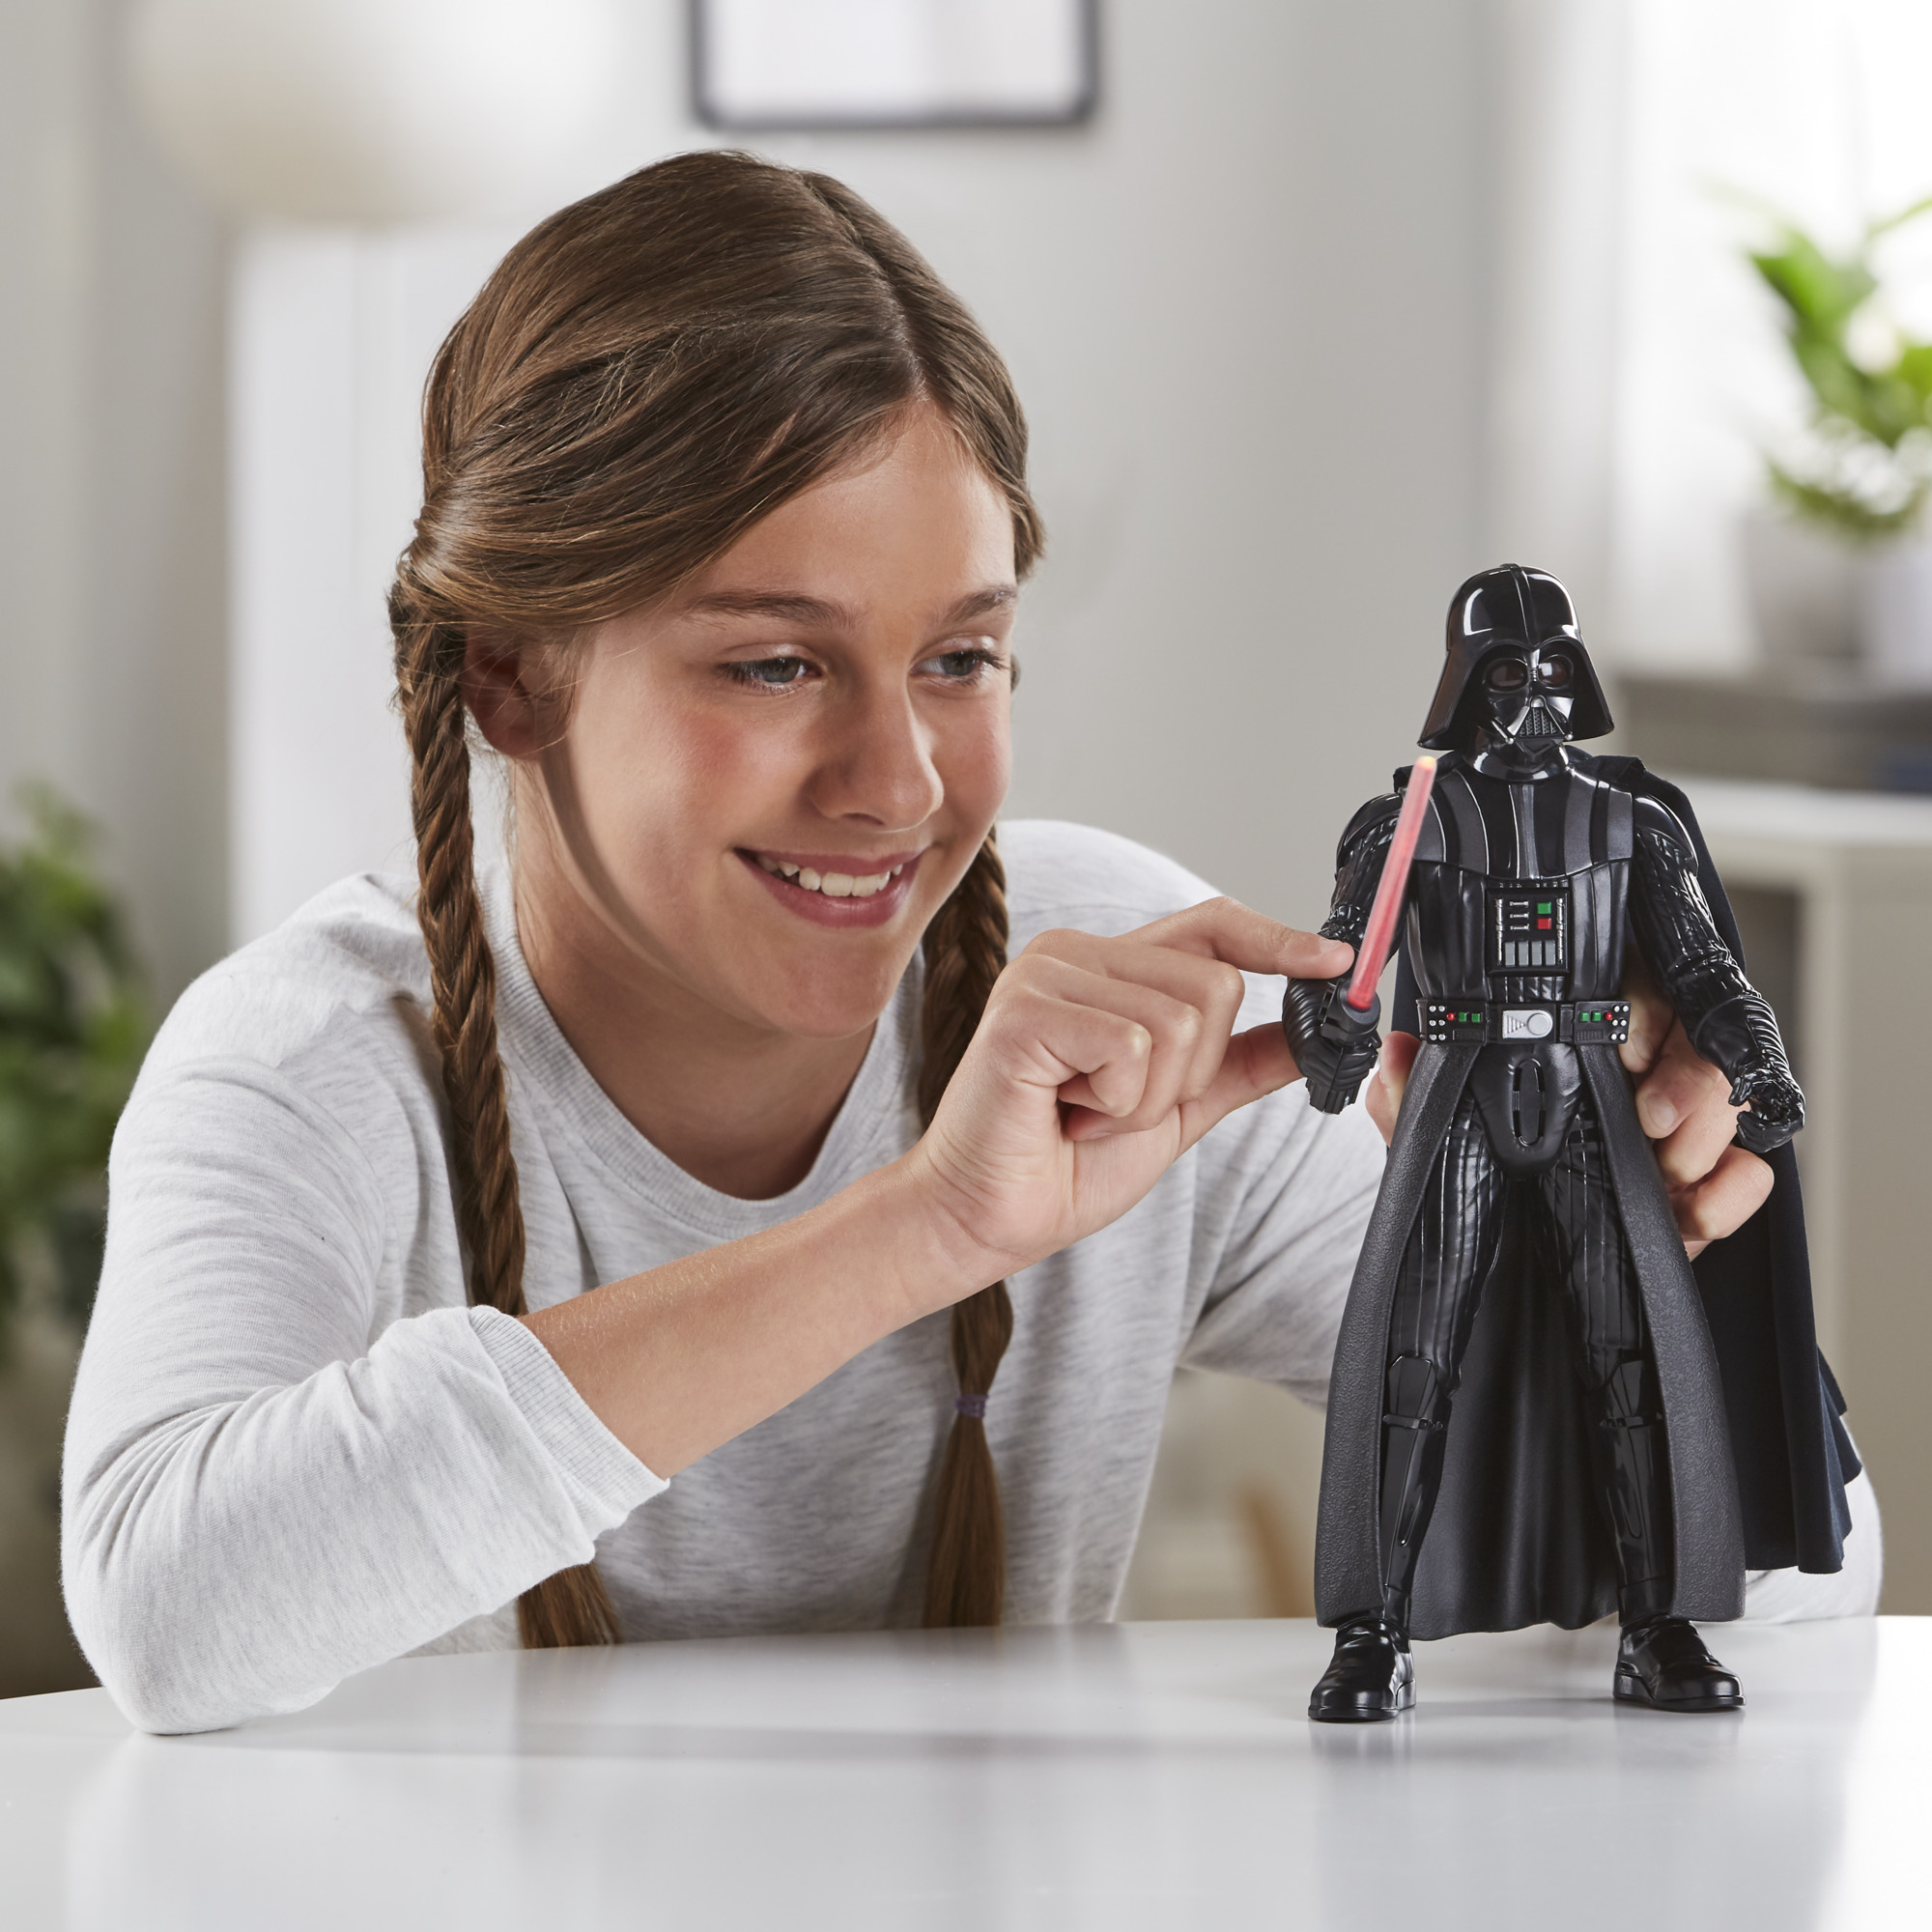 Star Wars: Obi-Wan Kenobi Darth Vader Toy Action Figure for Boys and Girls Ages 4 5 6 7 8 and Up (12”) - image 6 of 11